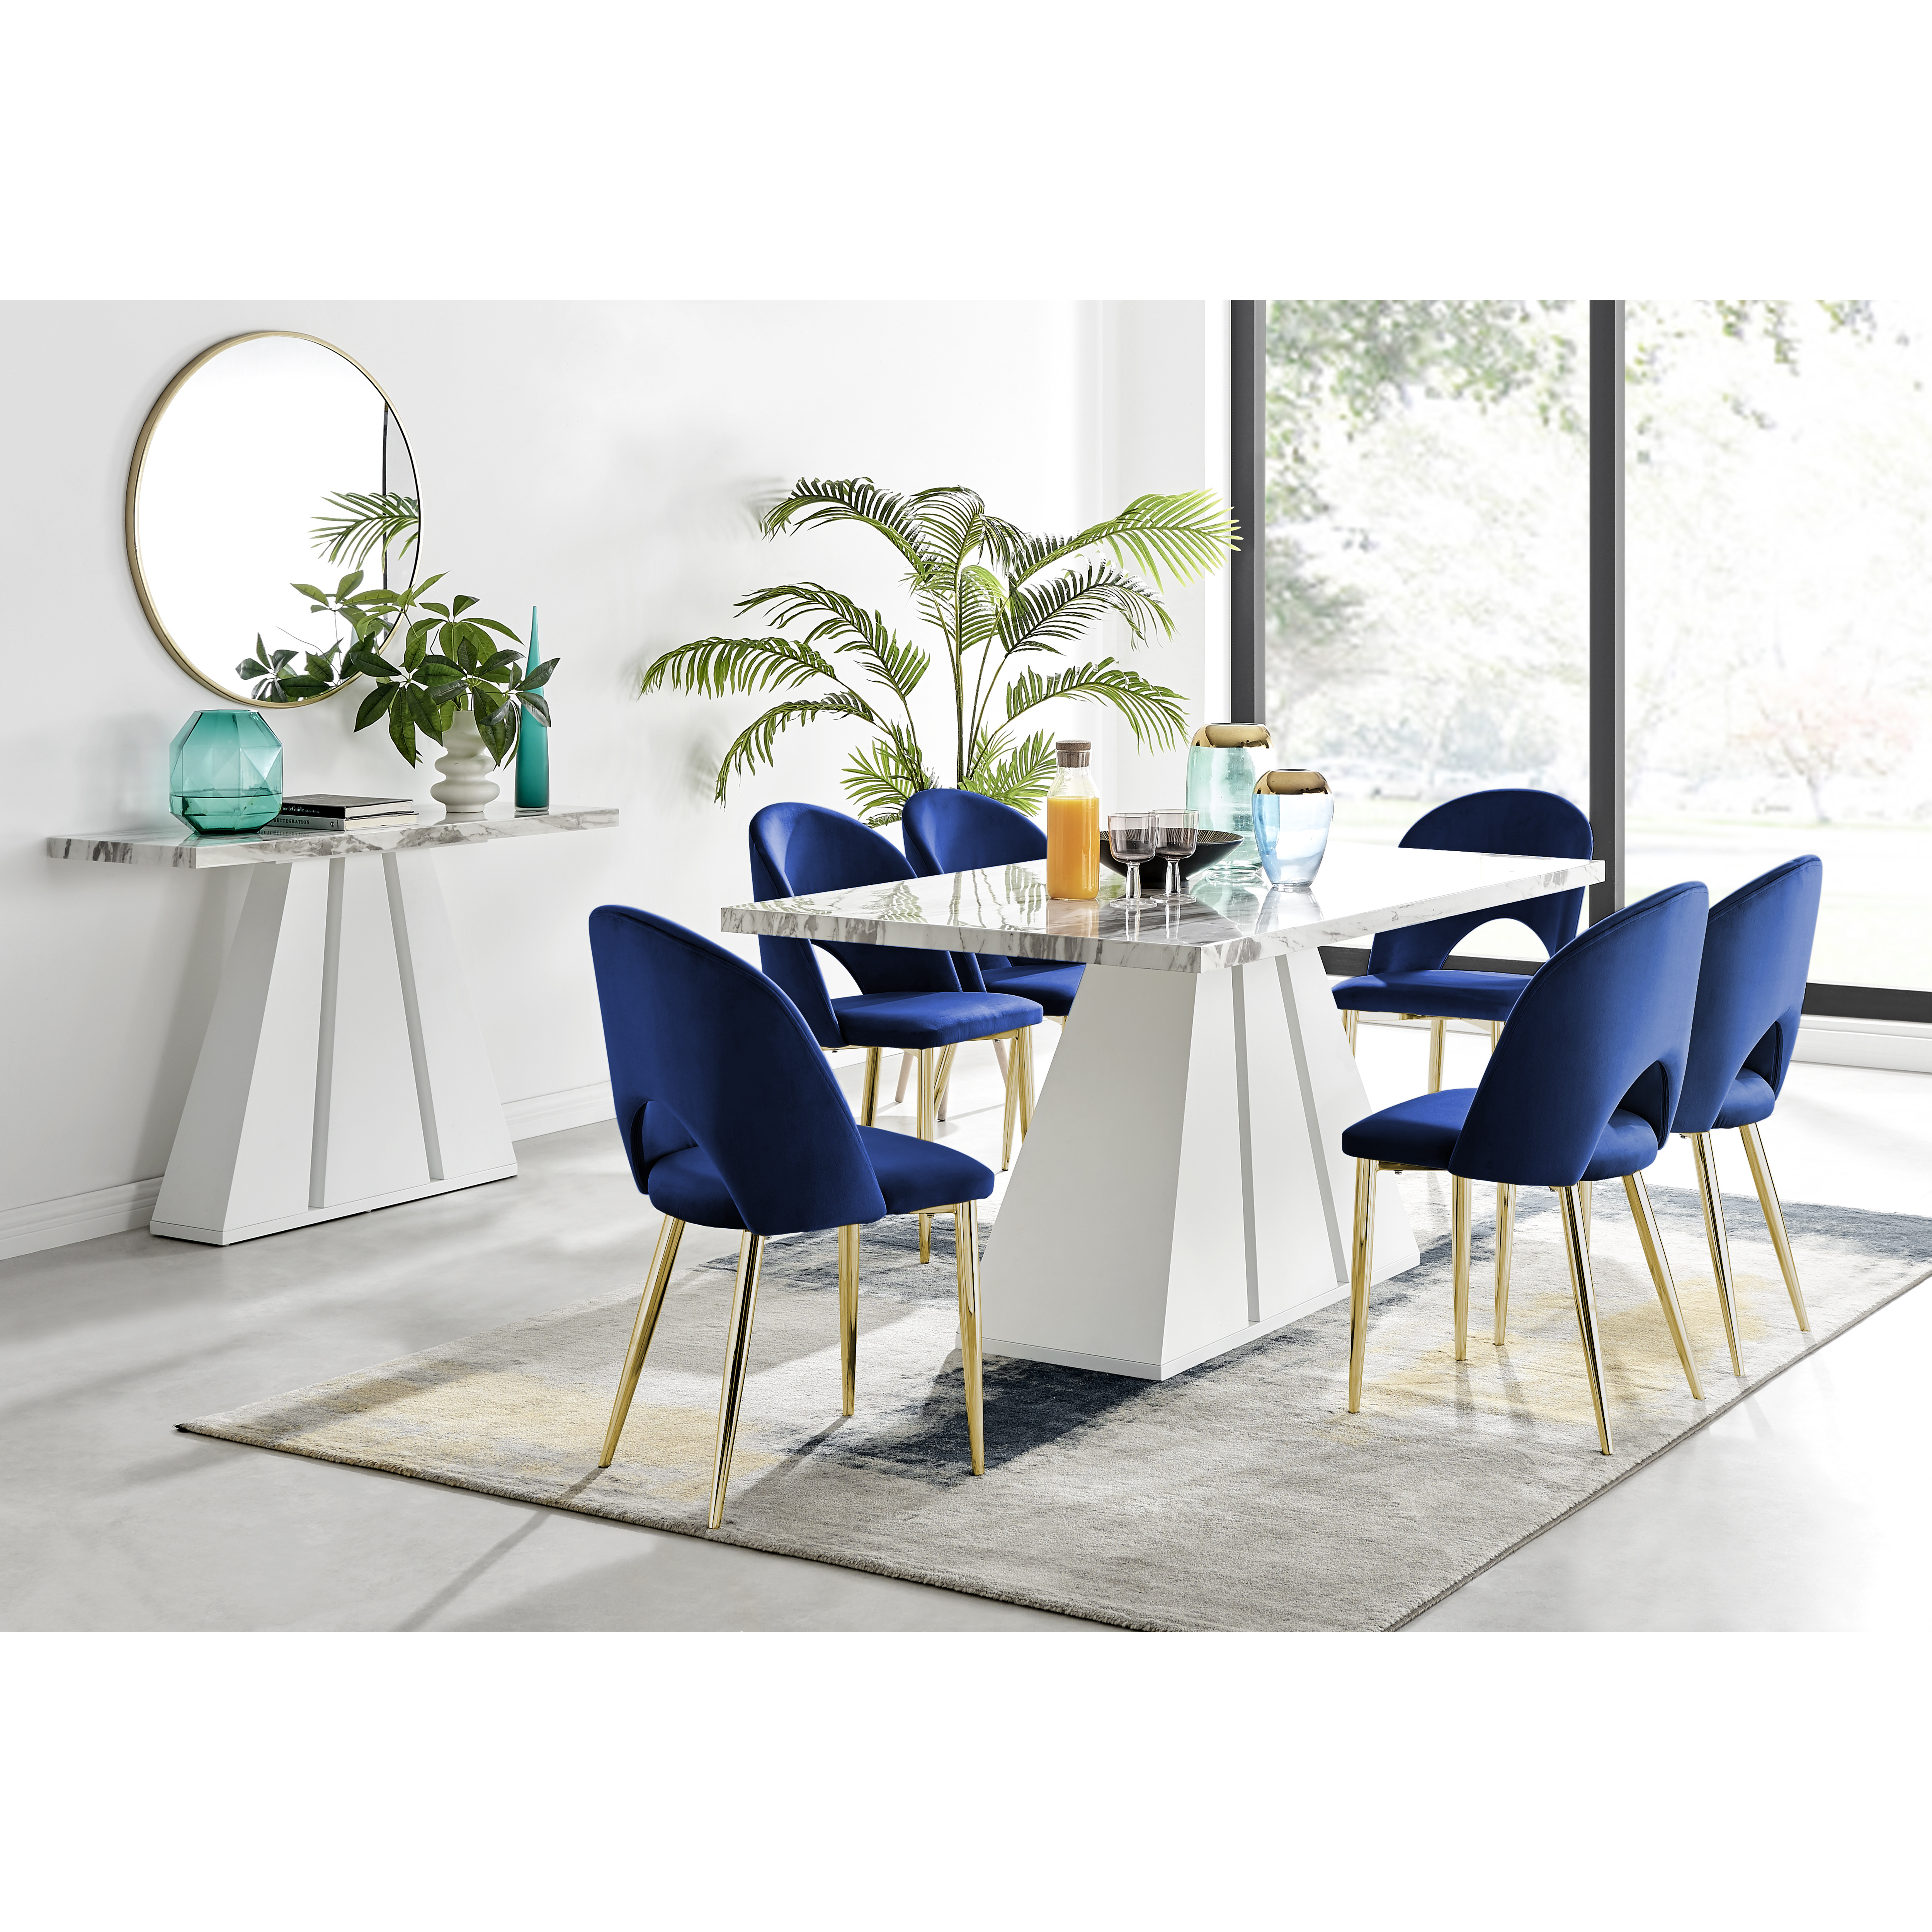 Athens White Marble Dining Table & 6 Arlon Gold Leg Chairs